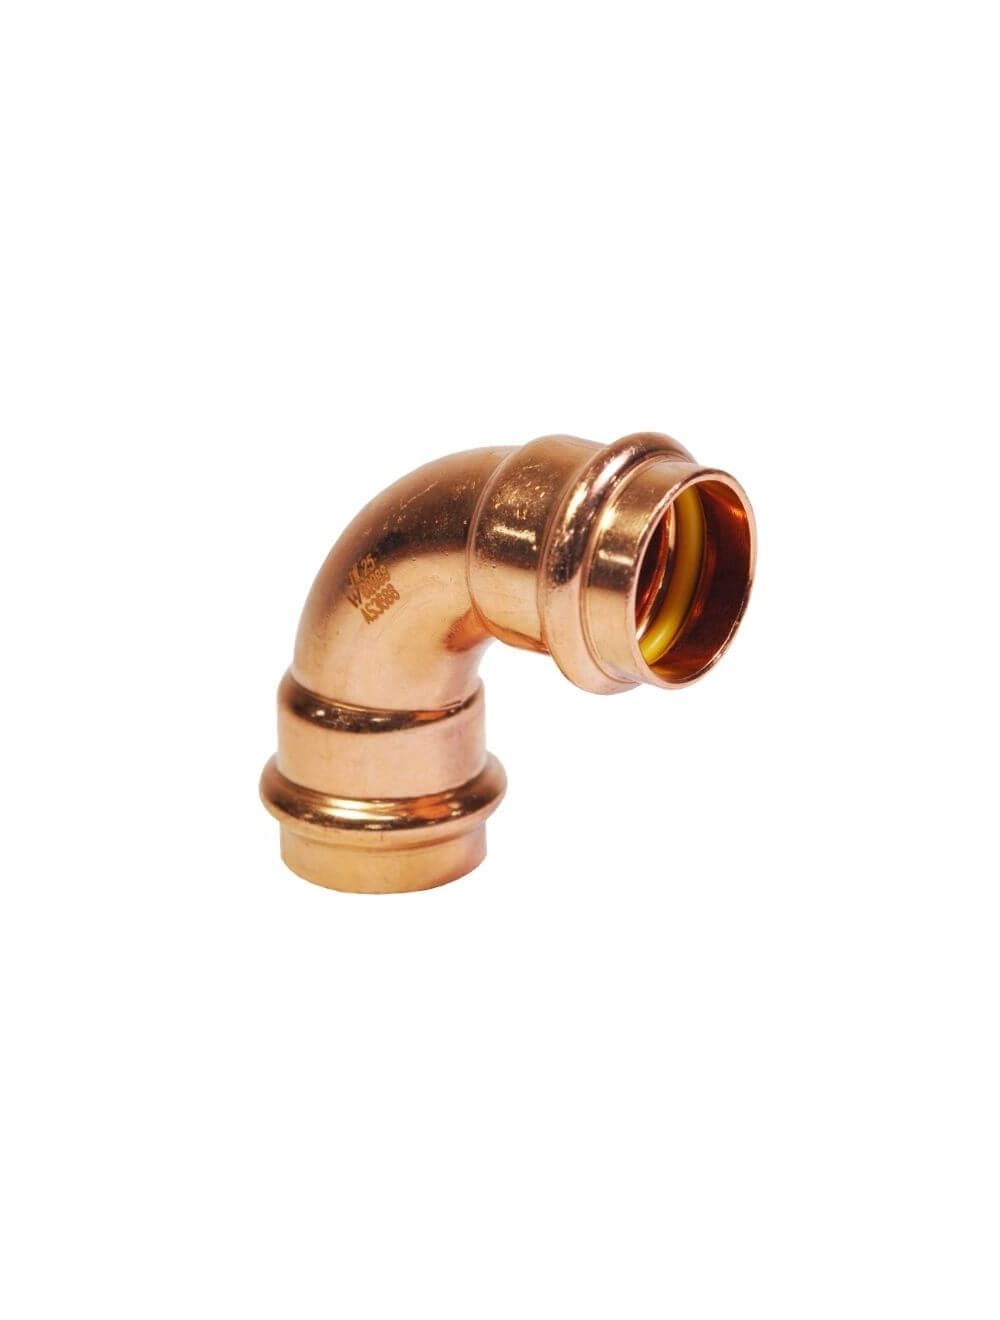 Brass Gas Compression Elbow 25Mm from Reece